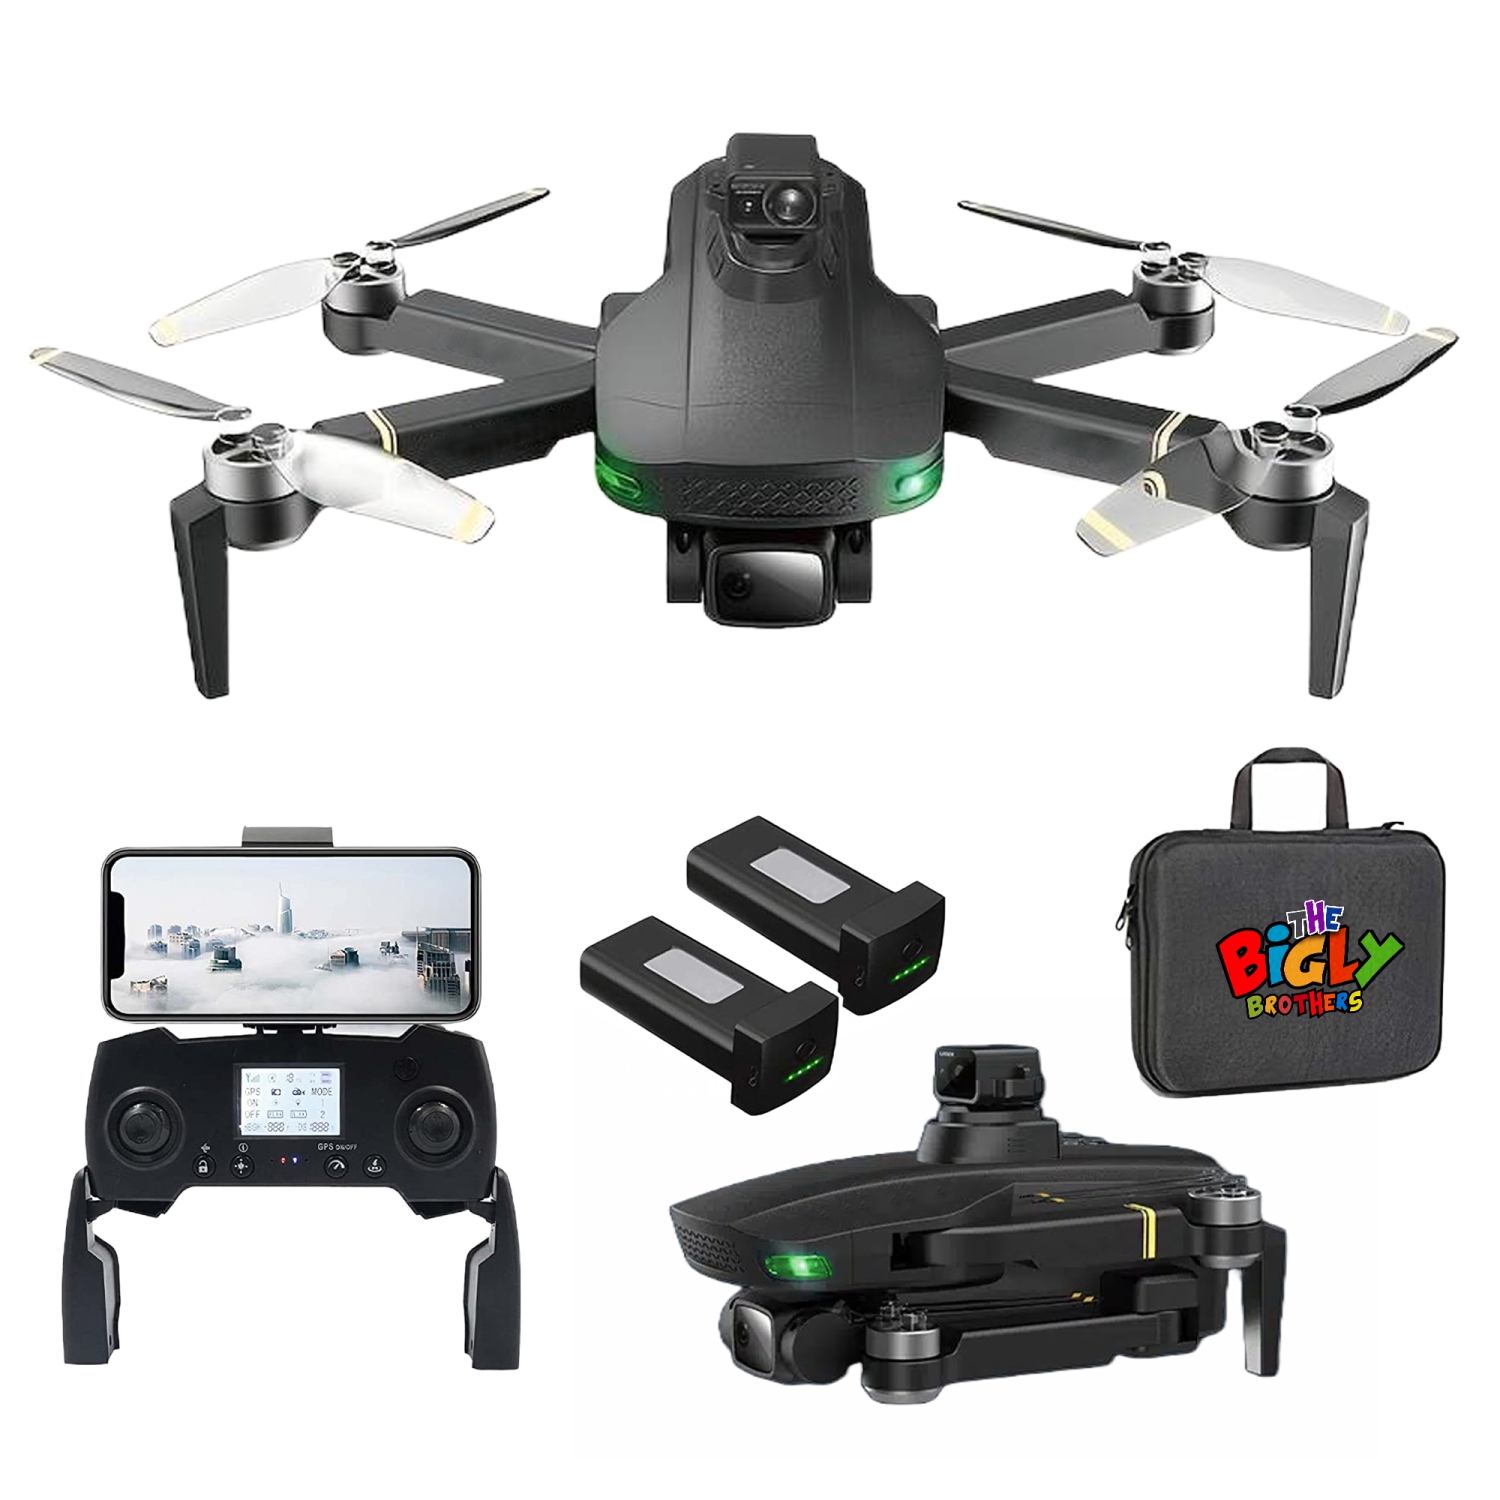 The Bigly Brothers GD93 Midnight Specter GPS Drone, 720 Degrees Obstacle Avoidance, Smart Return home, 4K Camera 1000m Range, 30mins Flight Time Below 249g, carrying case included